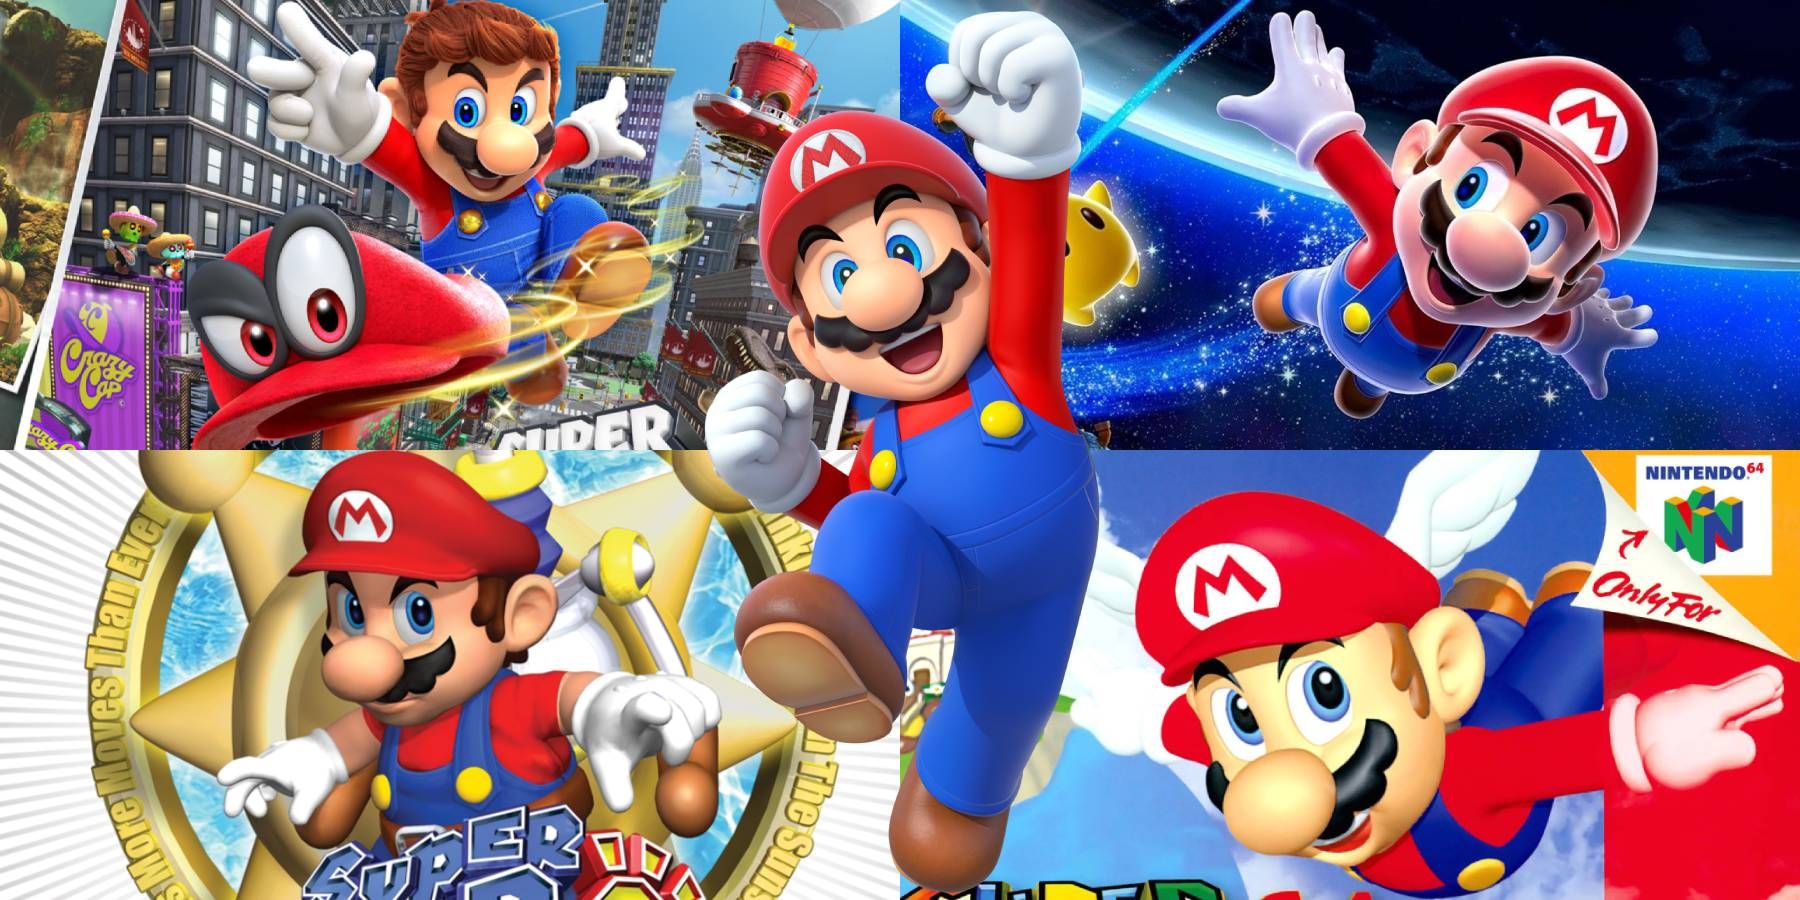 Mario jumping in front of the covers of Super mario Odyssey, Super Mario Galaxy, Super Mario Sunshine, and Super Mario 64